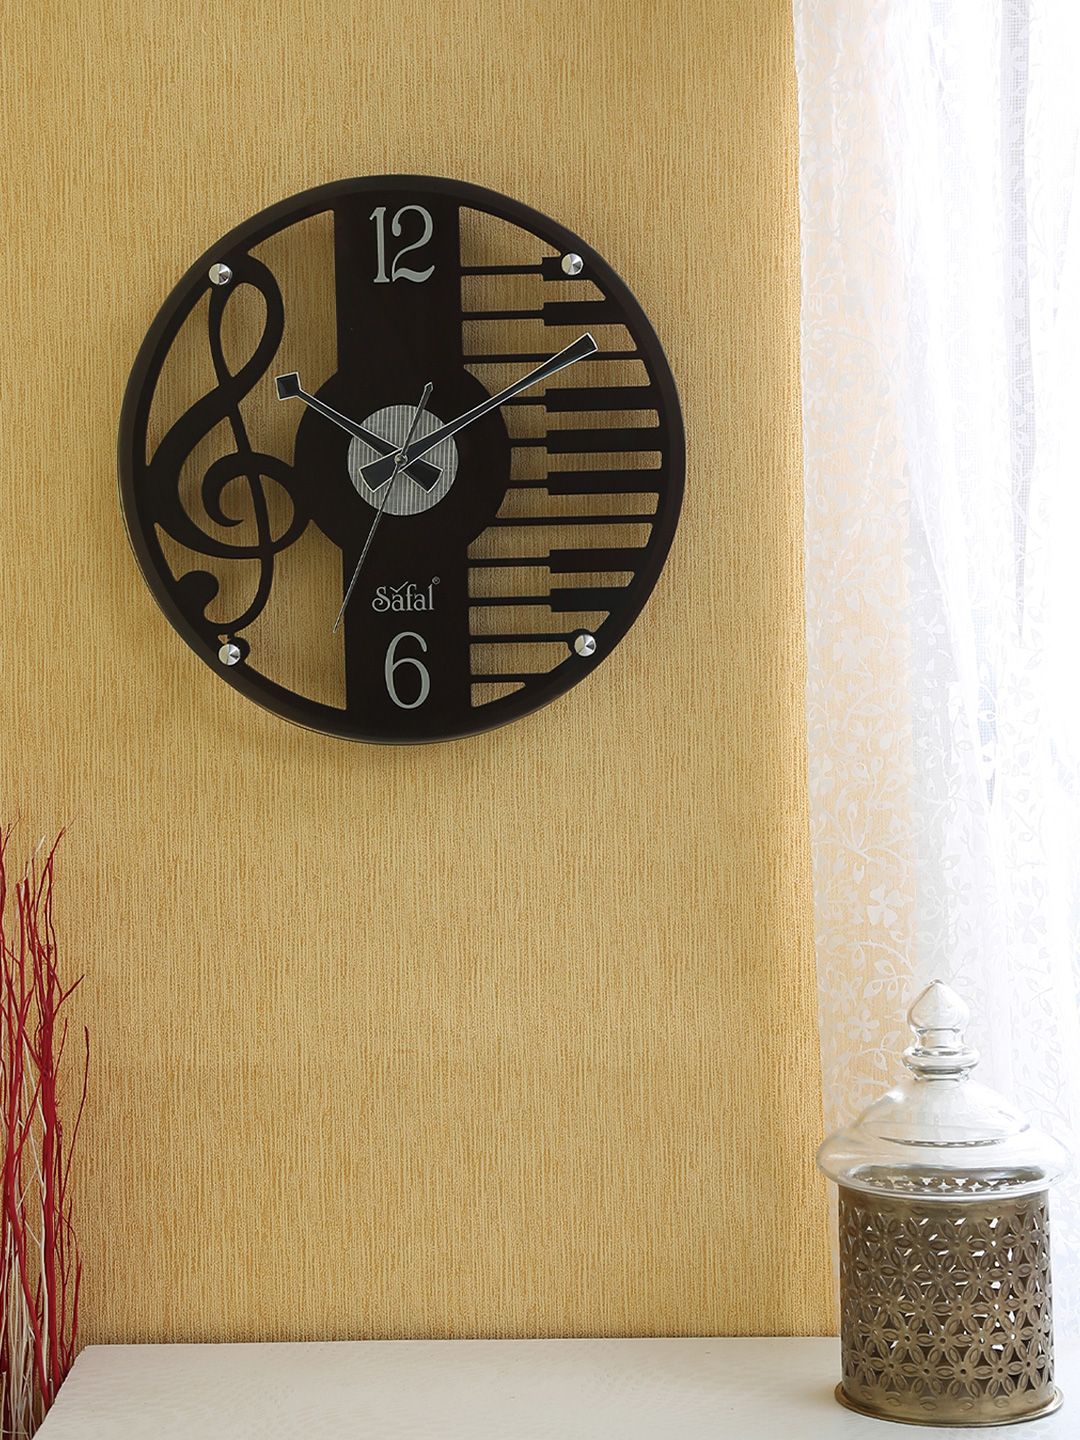 Safal Brown Round Analogue Wall Clock Price in India